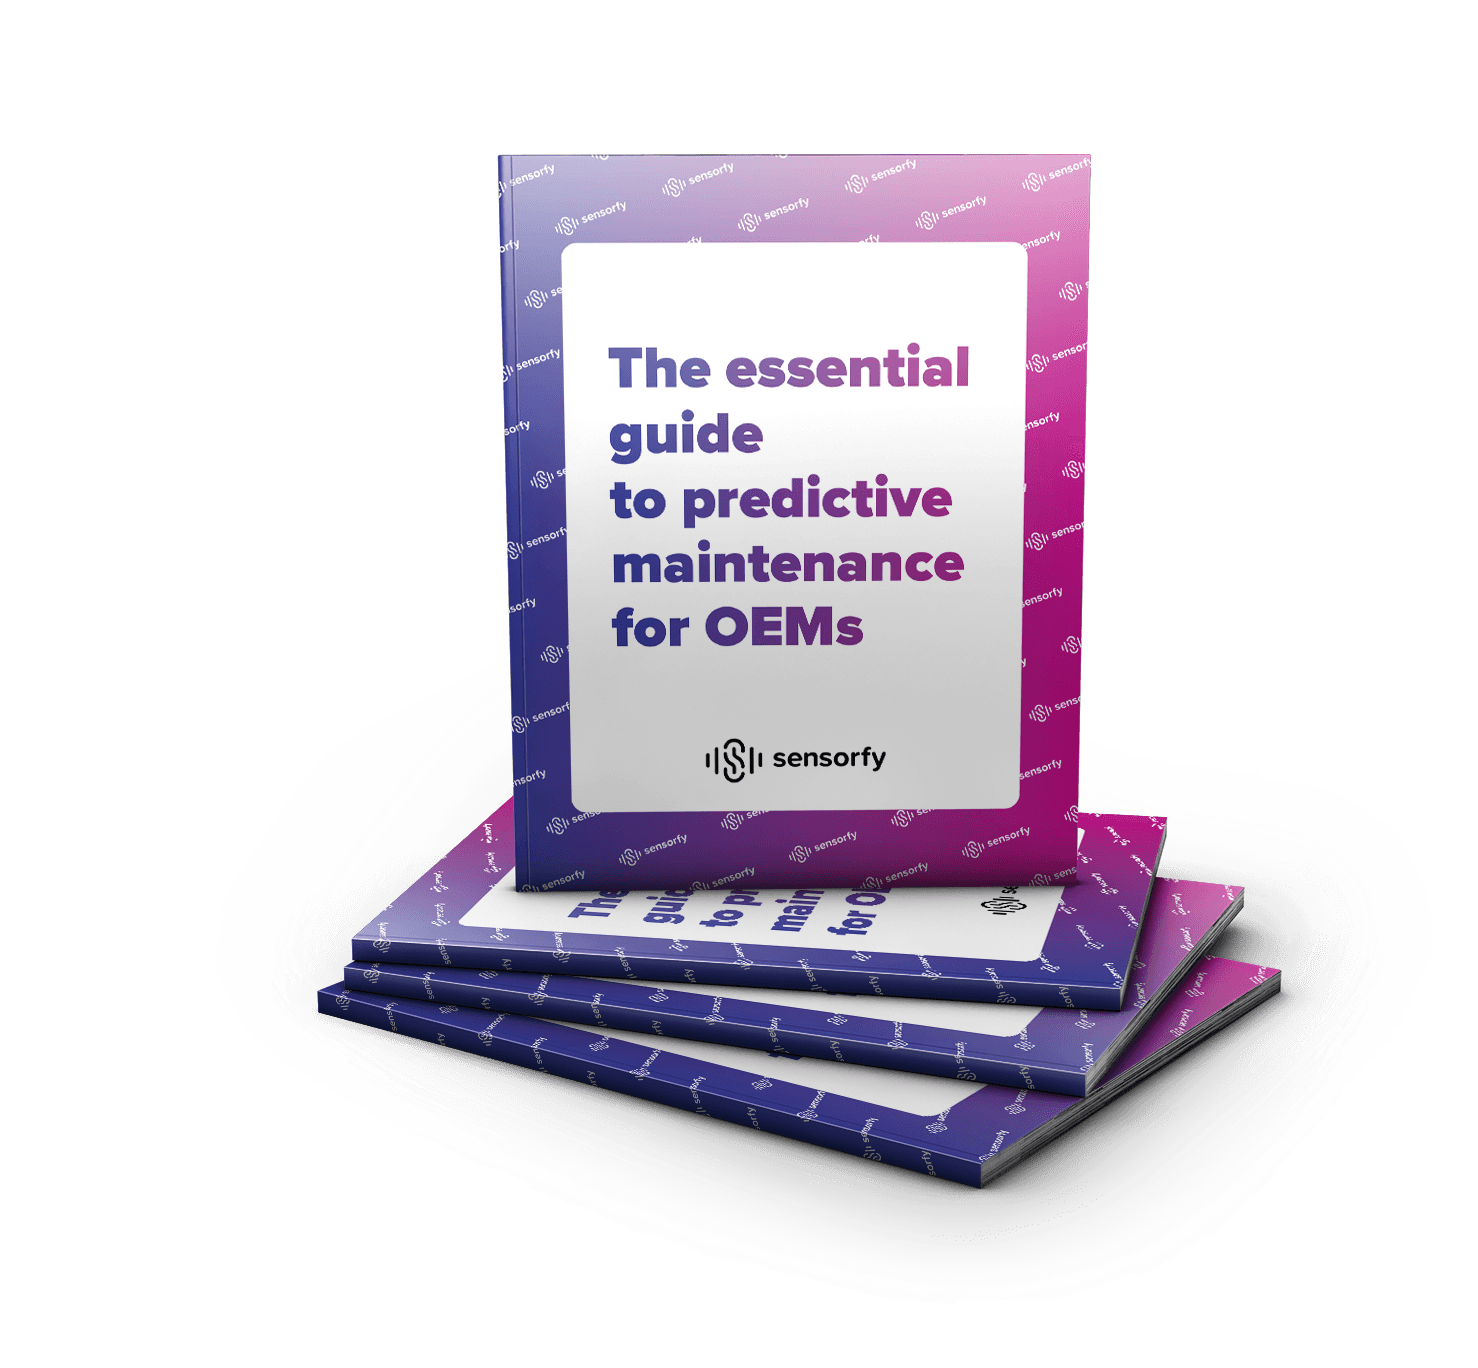 Ebook thumb - The essential guide to predictive maintenance for OEMs